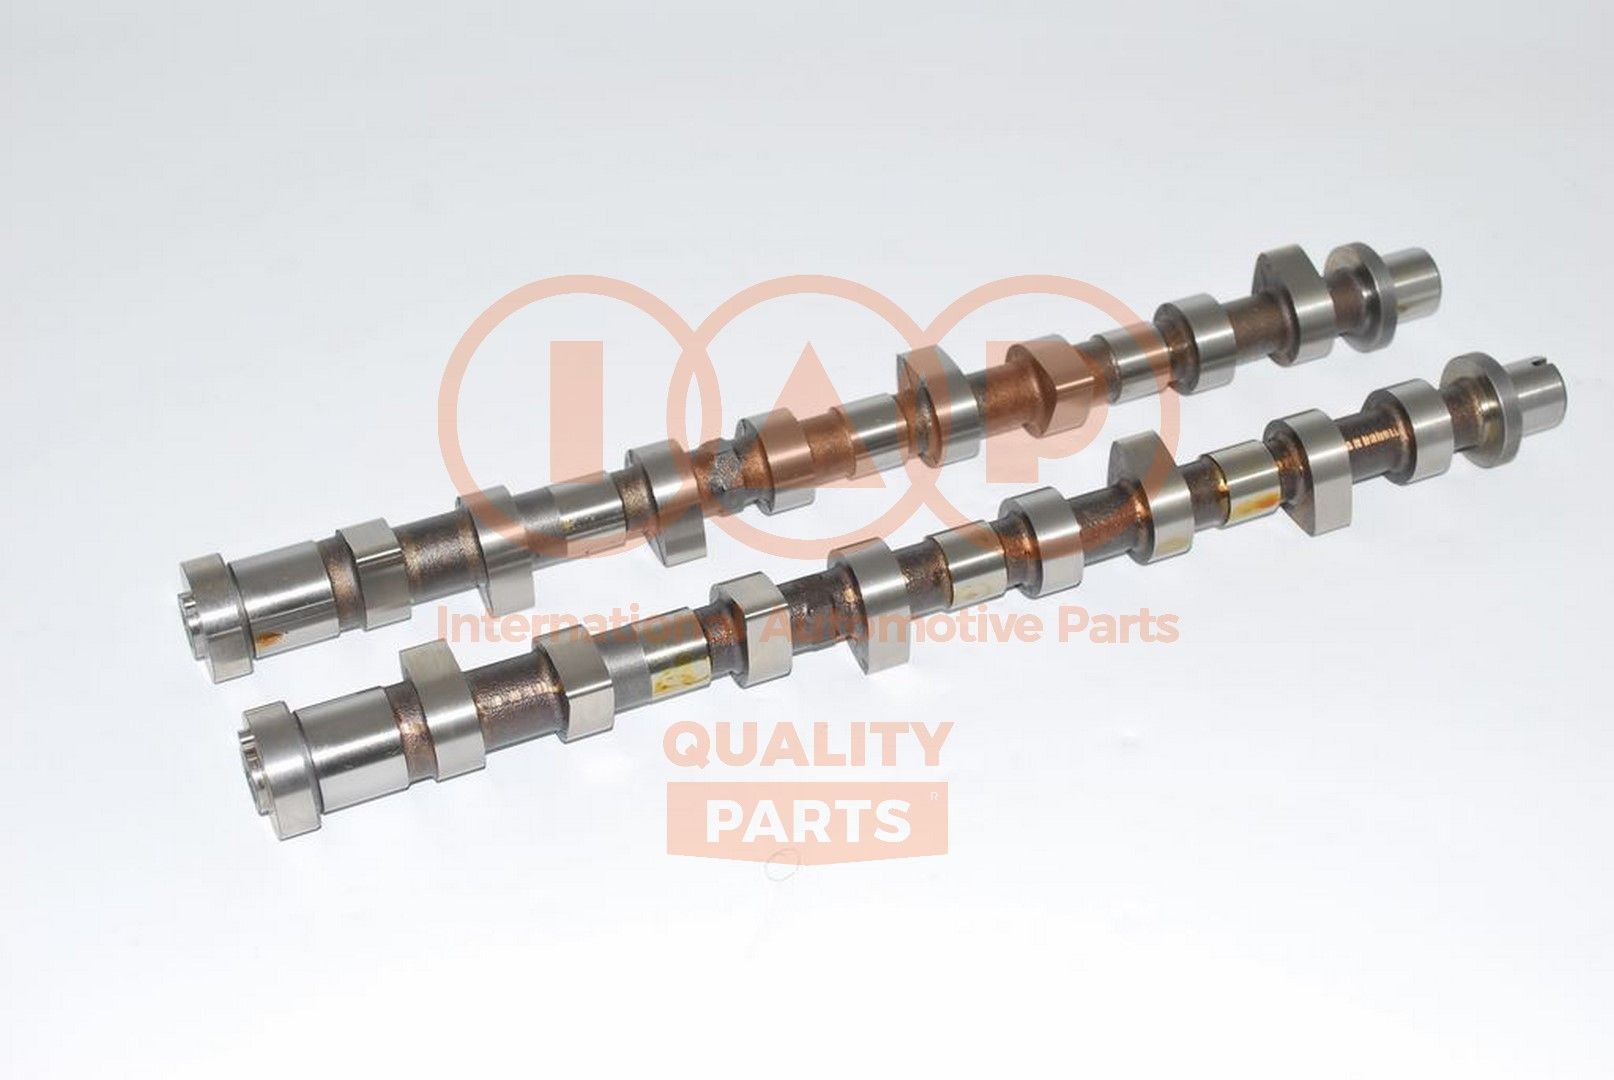 IAP QUALITY PARTS Intake Side, exhaust sided Camshaft Kit 124-13150K buy